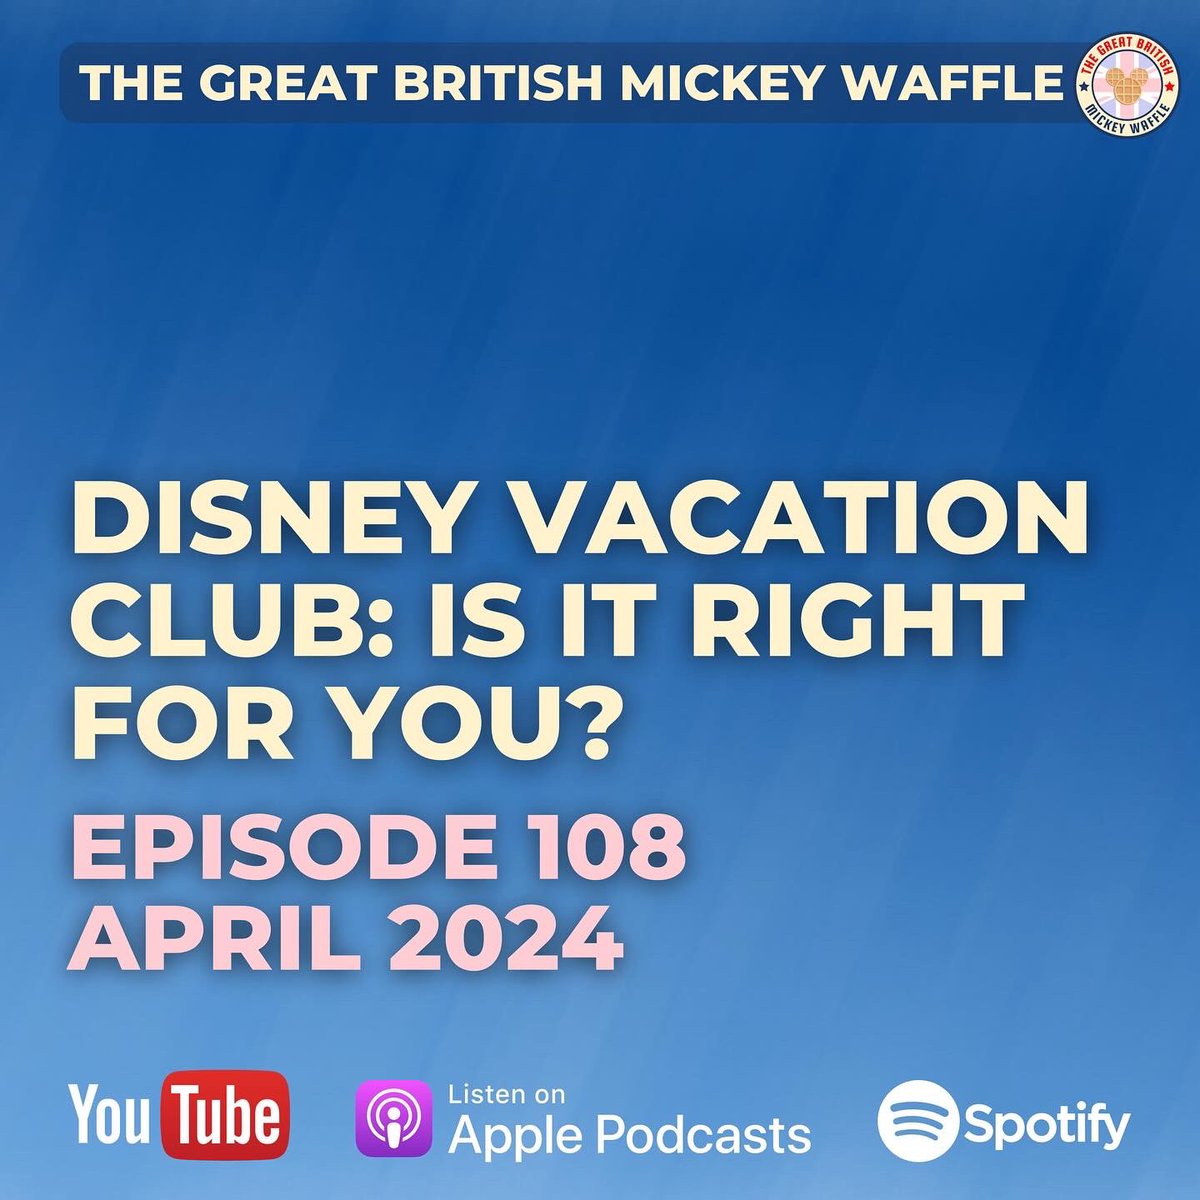 🎙️ Tune into the latest episode of The Great British Mickey Waffle podcast as we explore the ins and outs of Disney Vacation Club! Is it the right fit for your next magical adventure? Tune in to find out! #DisneyVacationClub #GBMW ✨ pod.fo/e/22c5f3